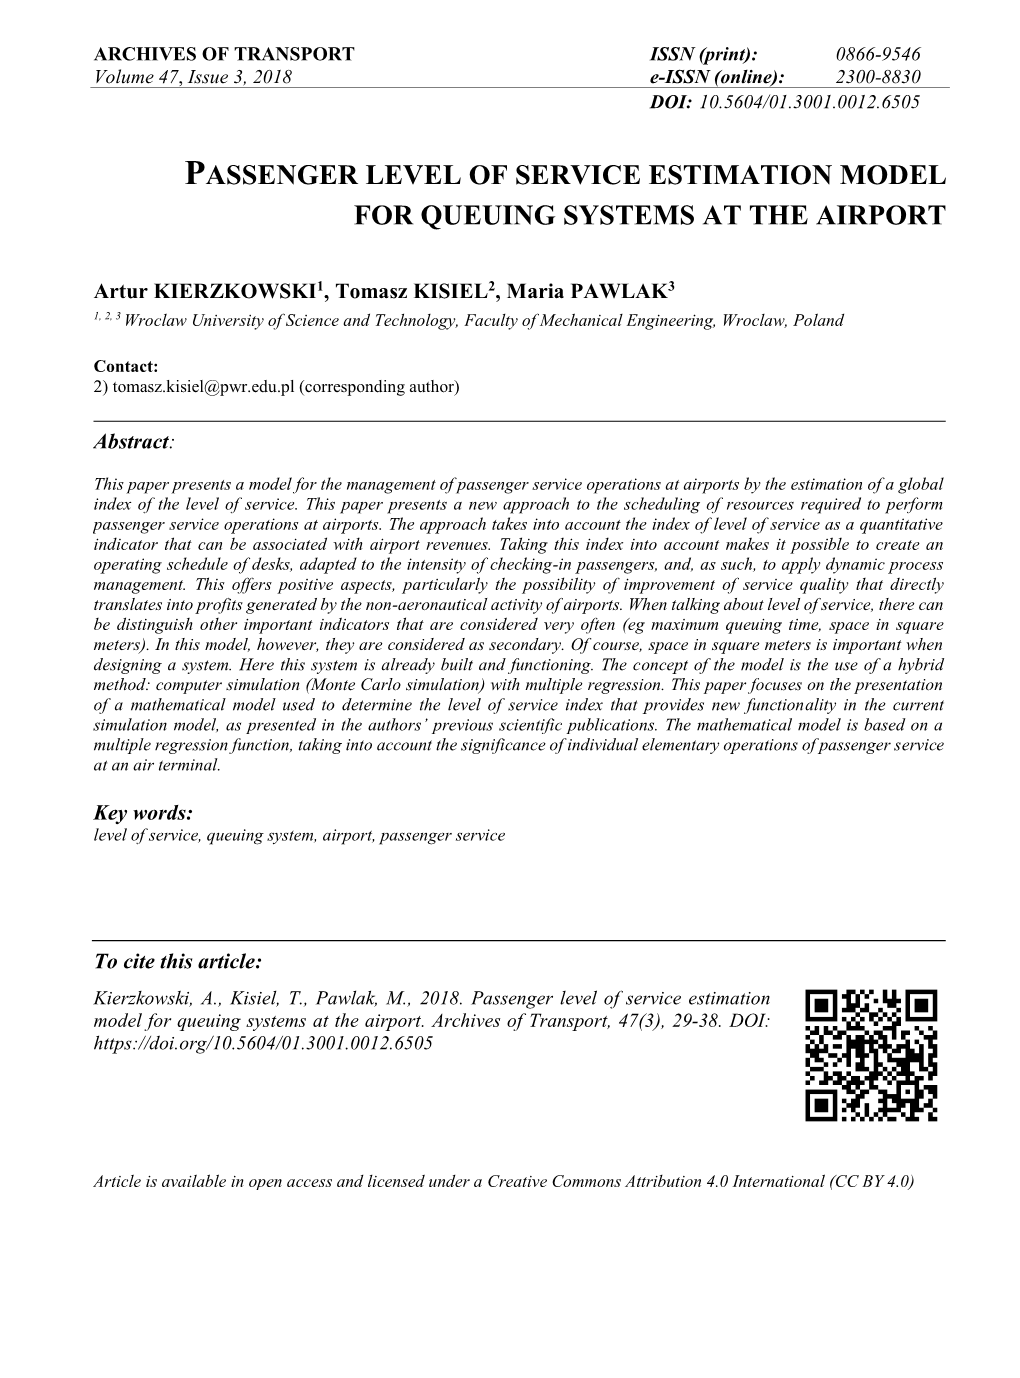 Passenger Level of Service Estimation Model for Queuing Systems at the Airport